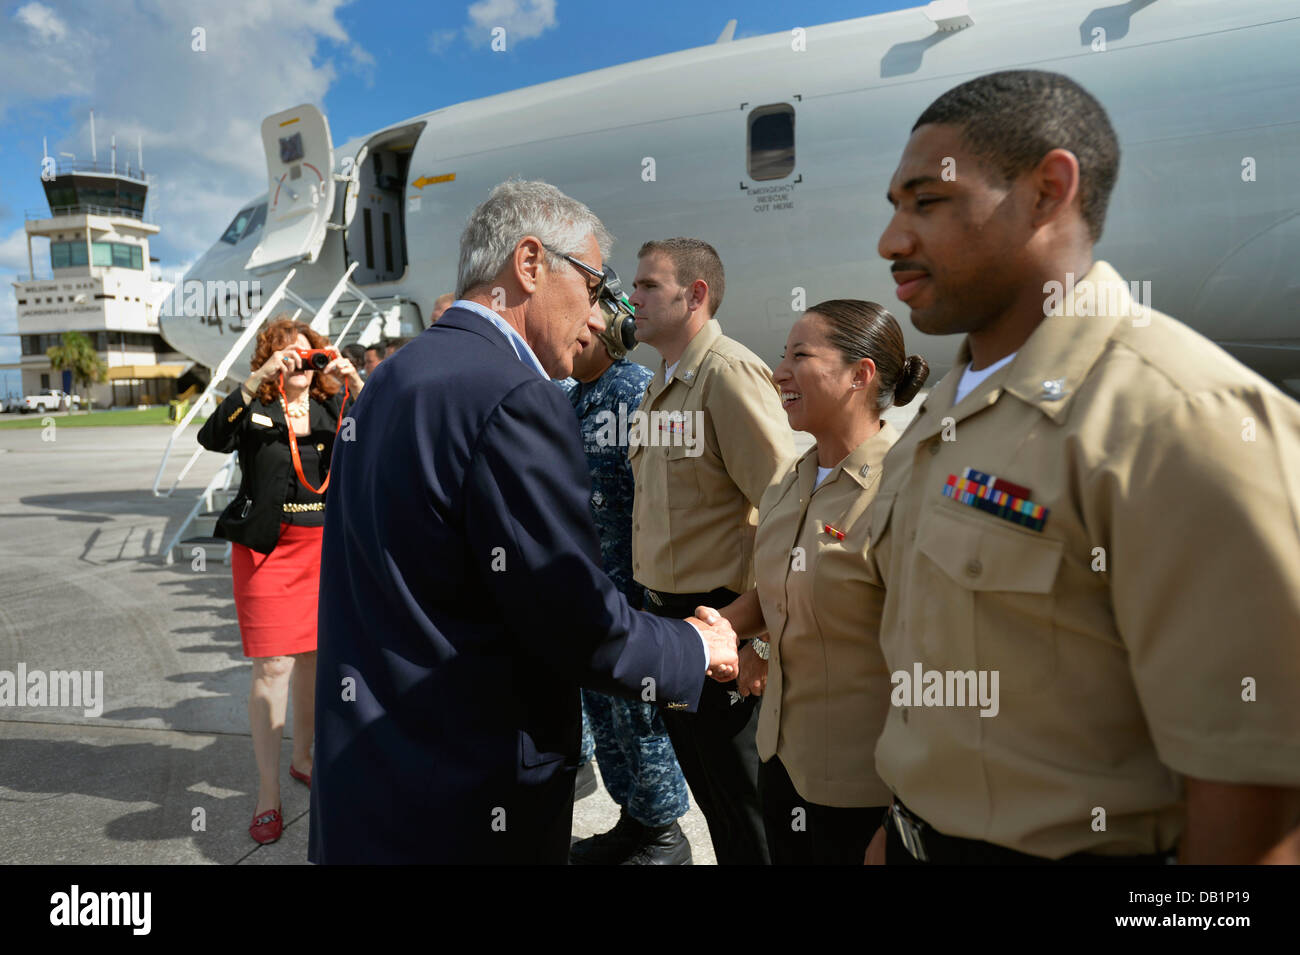 Secretary of Defense Chuck Hagel hands out coins to U.S. Sailors assigned to his motorcade before boarding a P-8 Poseidon aircraft to depart Naval Air Station Jacksonville, Fla., July 16, 2013. Hagel was on a three-day trip to visit several installations Stock Photo